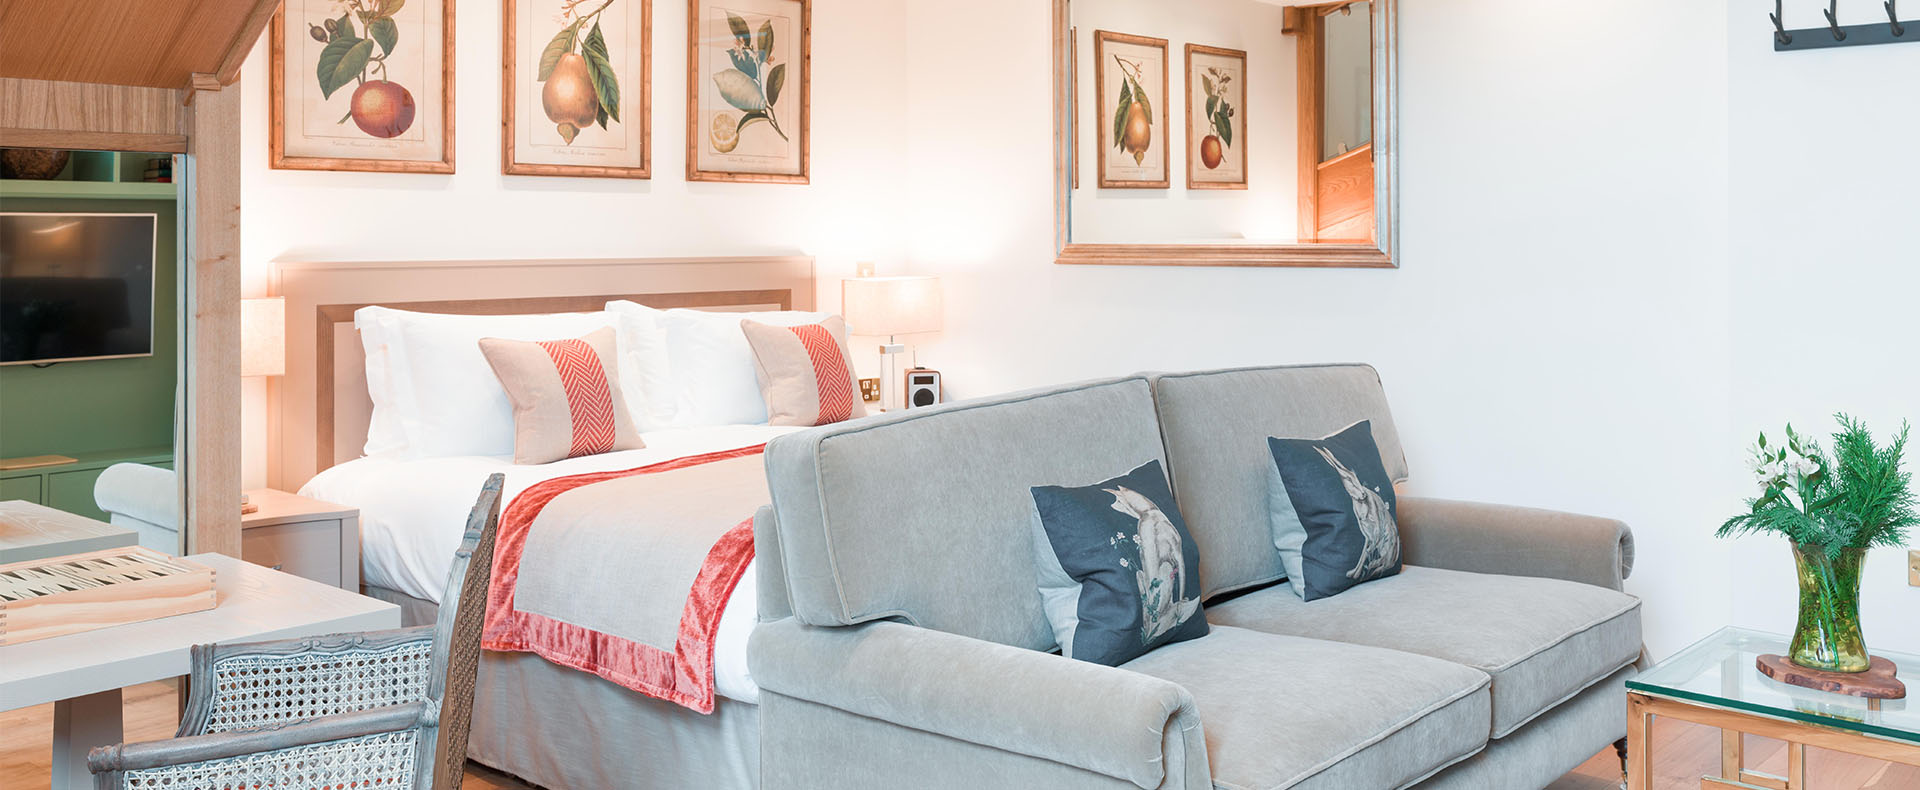 Hayloft Suite &#124; The Montagu Arms Hotel &#124; New Forest